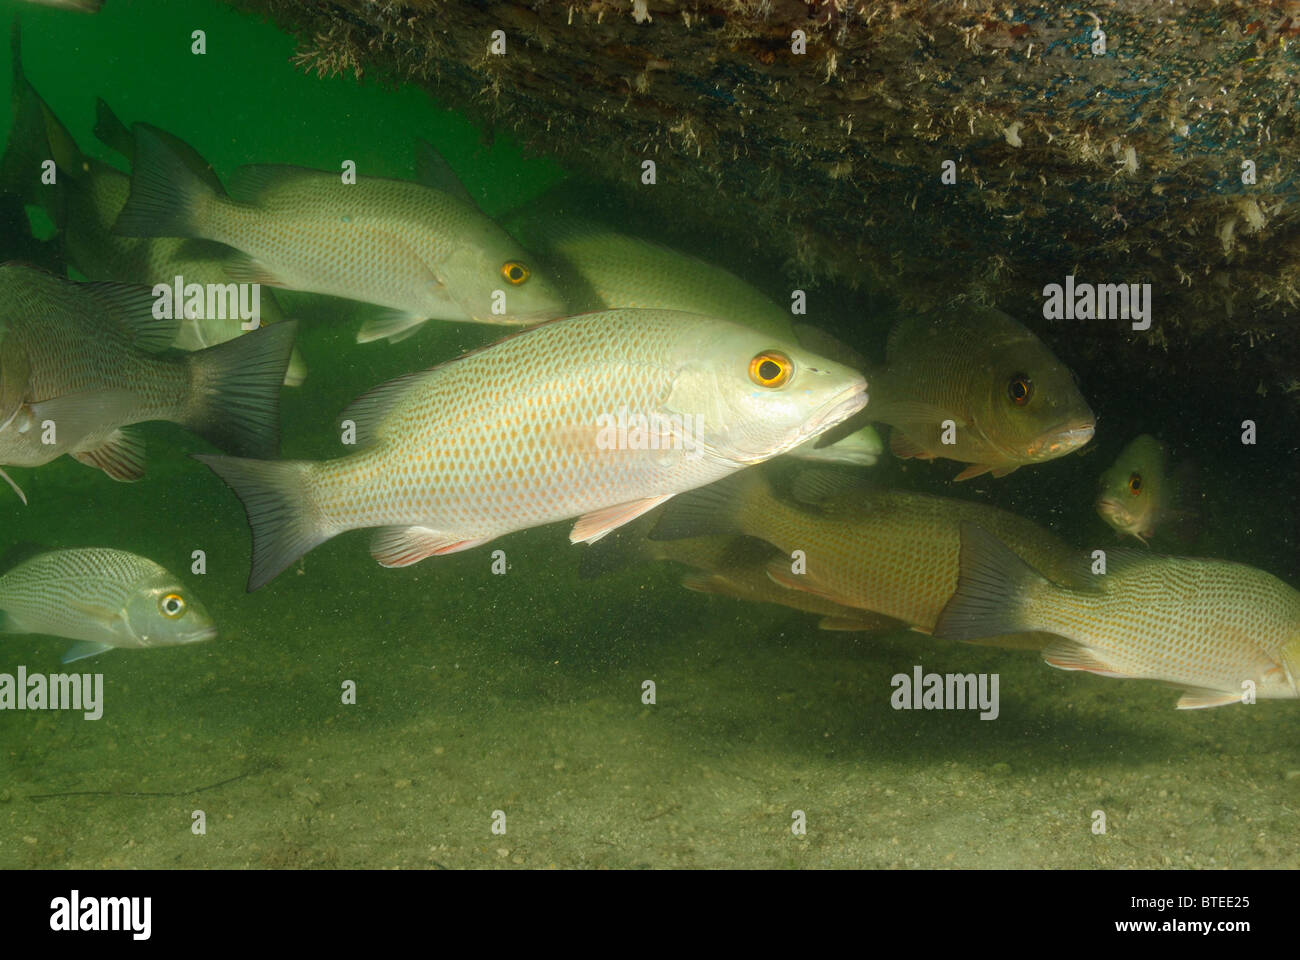 School of mangrove snappers off  Key Largo, Gulf of Mexico, Florida, USA Stock Photo